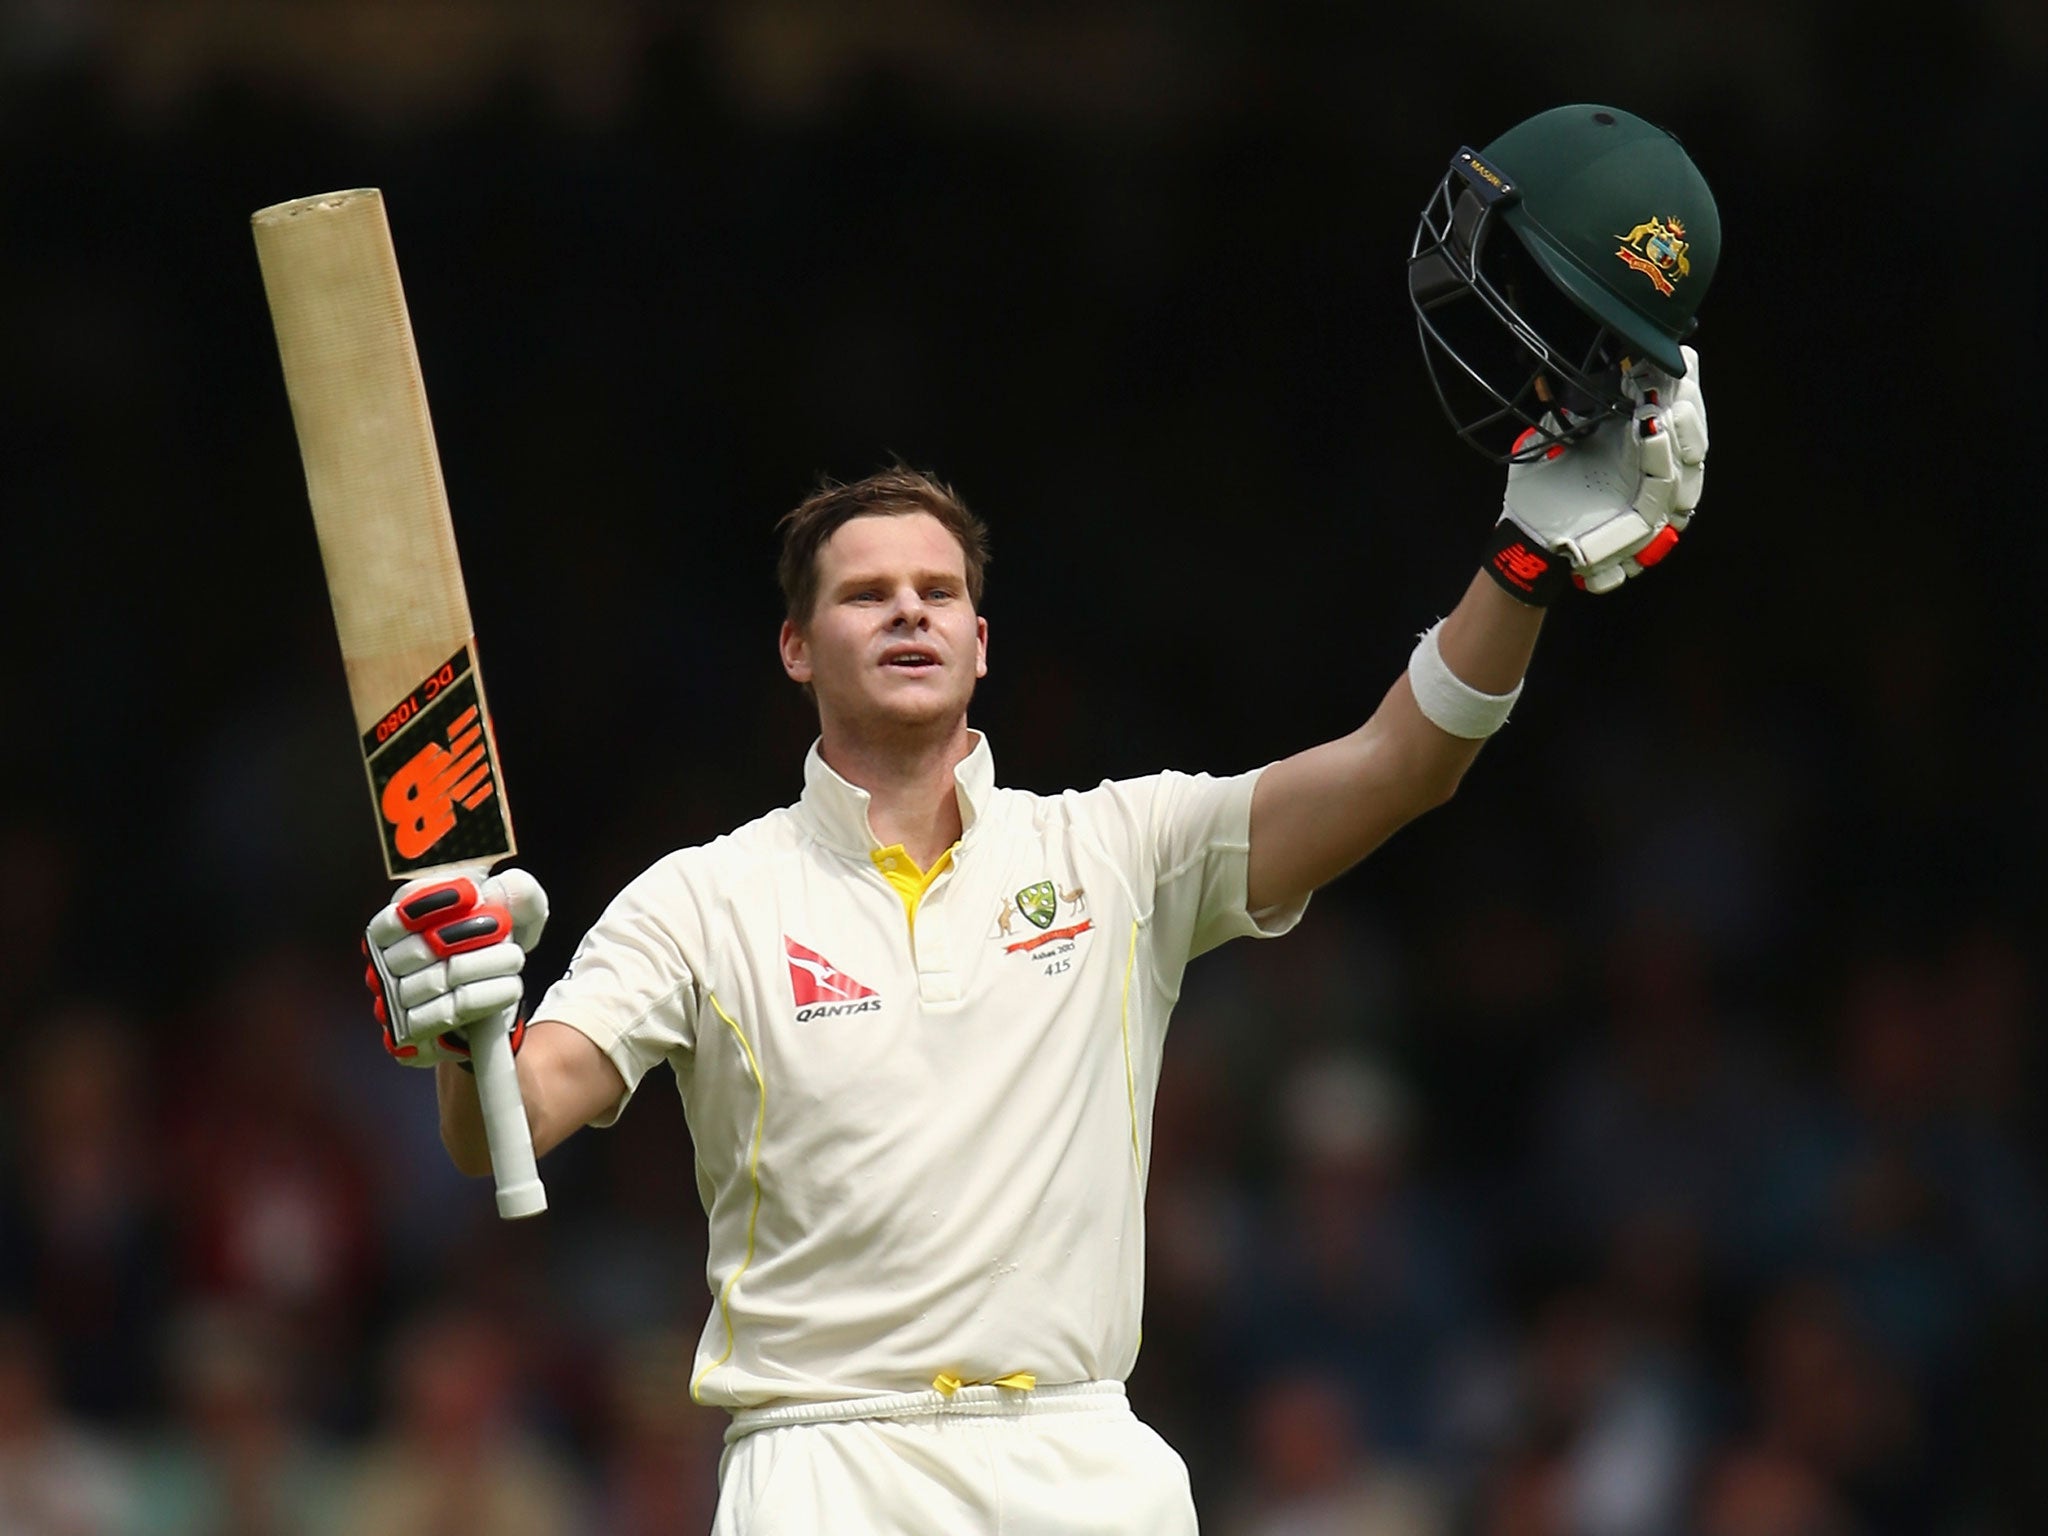 Steve Smith hit a magnificent 215